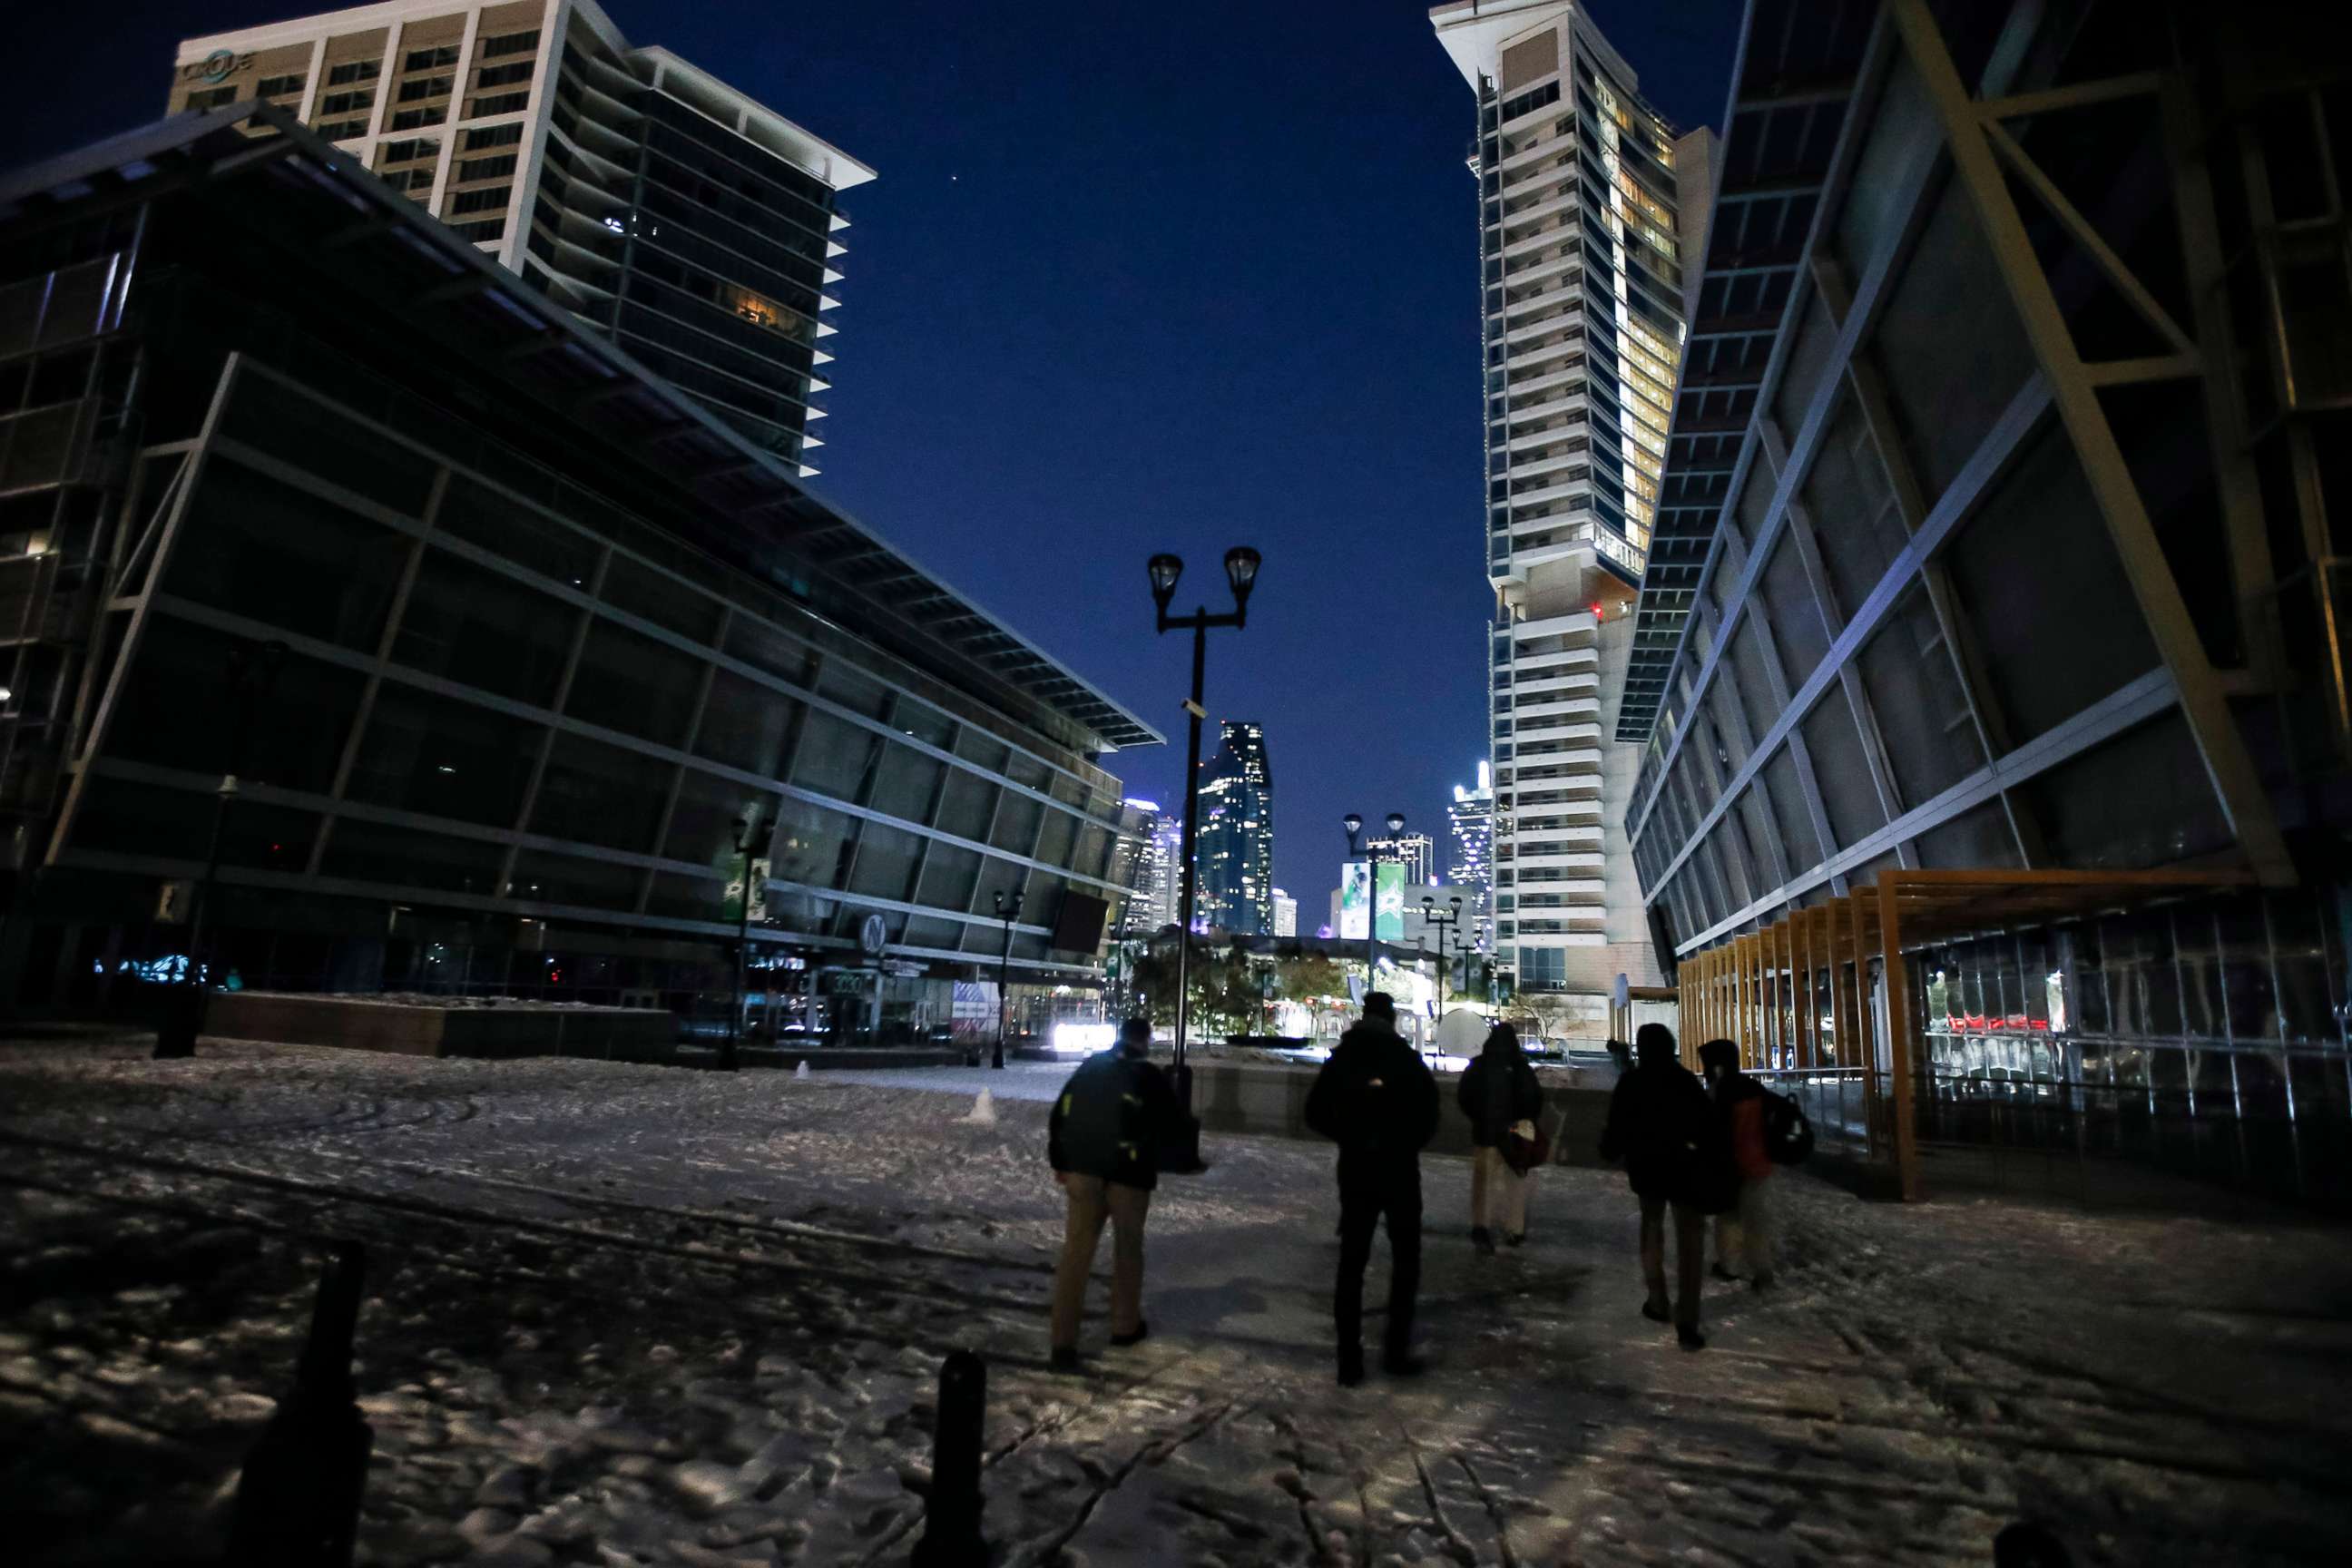 PHOTO: Due to a shortage of electricity in the region, the lights and screens in front of American Airlines Center are turned off on Feb. 15, 2021, saving electricity resources in Dallas. 